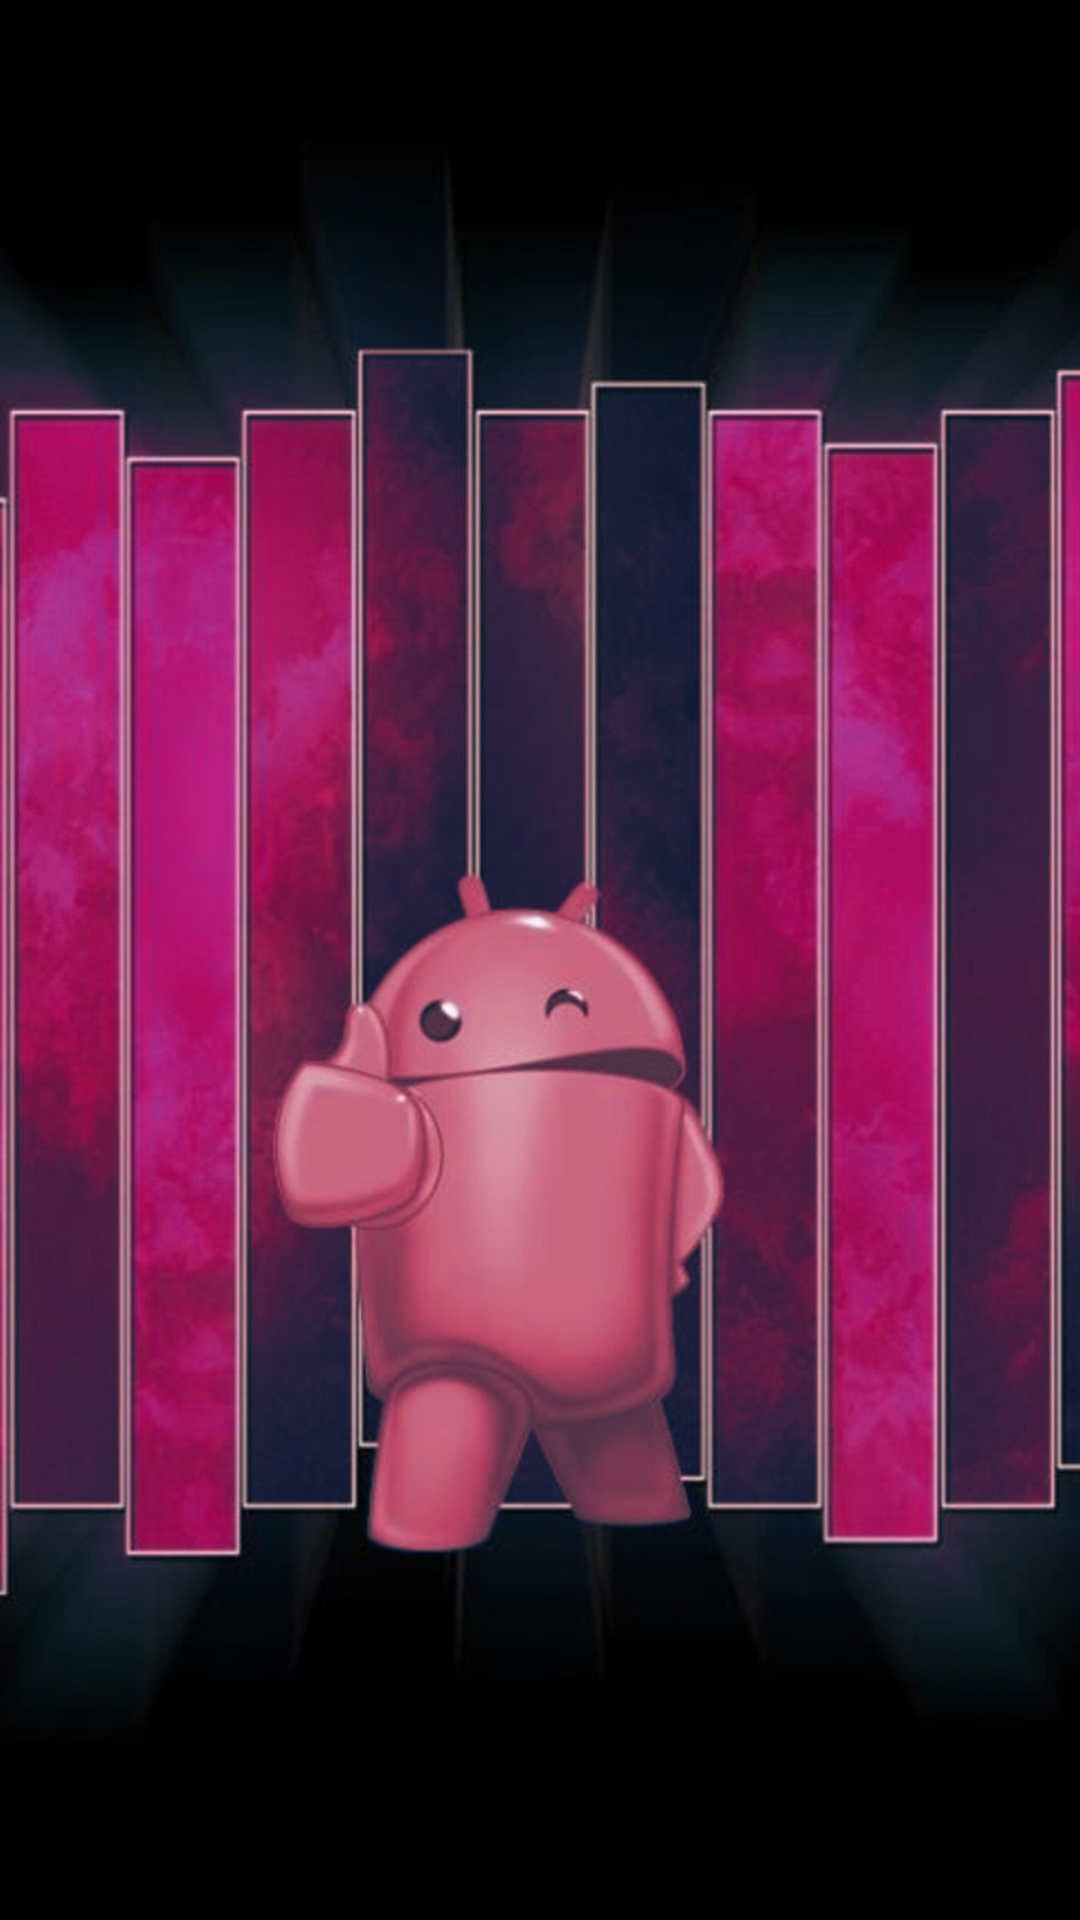 Android Thumbs Up Pink Smartphone Wallpapers Hd - Free Wallpaper Pink Android , HD Wallpaper & Backgrounds